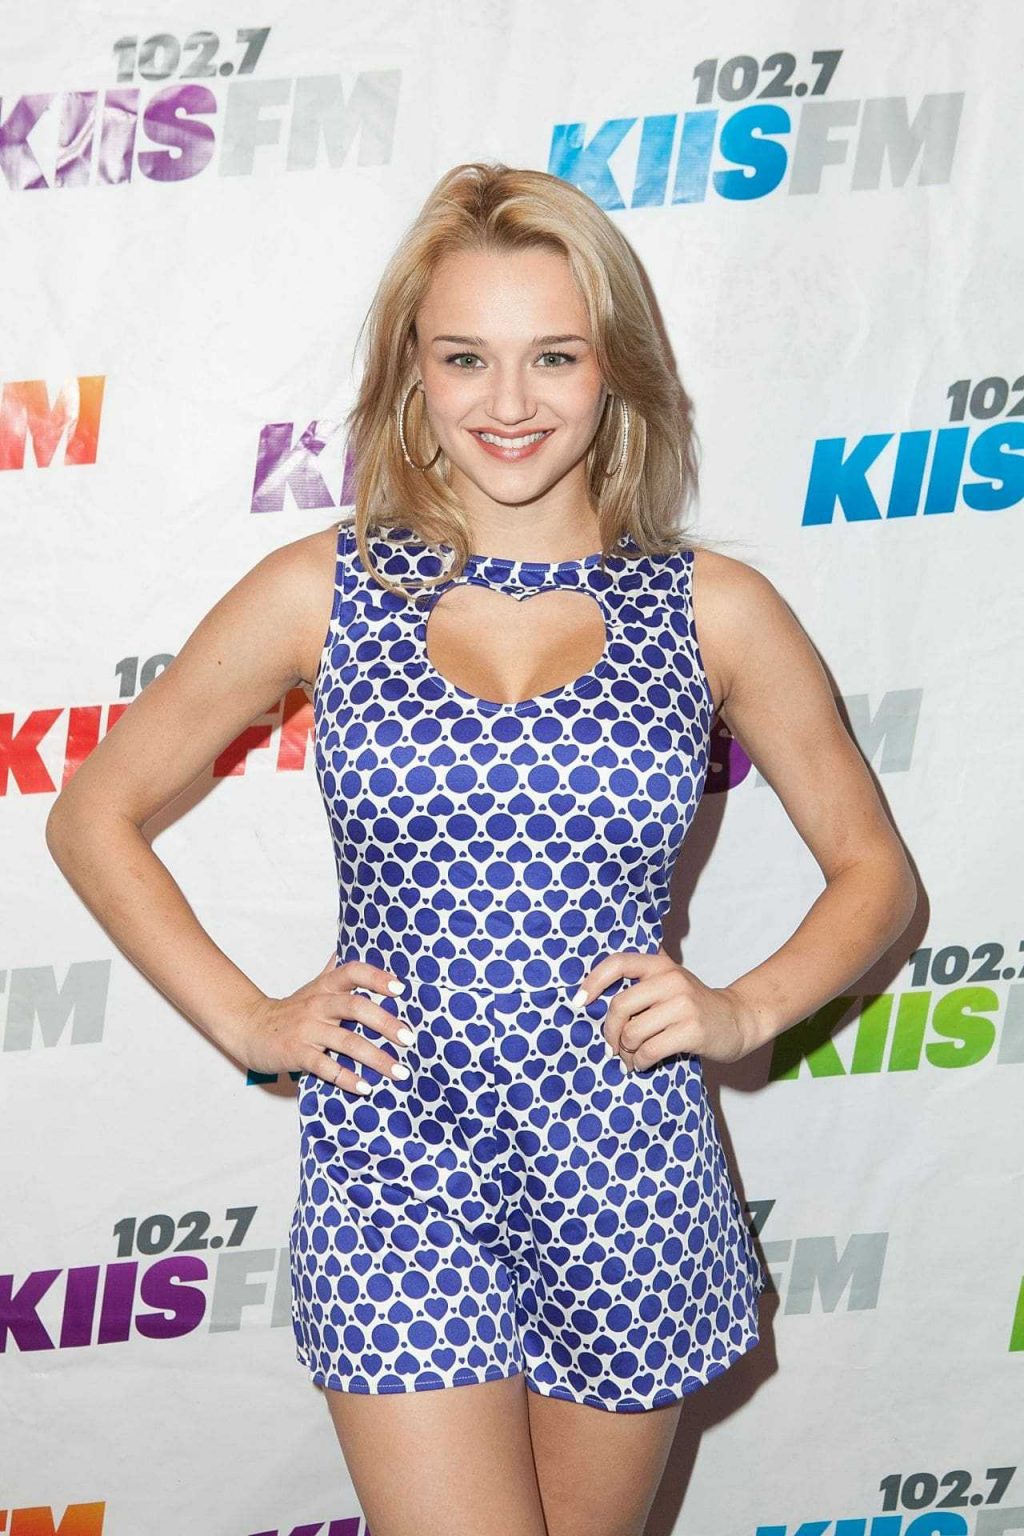 51 Hunter King Nude Pictures Display Her As A Skilled Performer 11